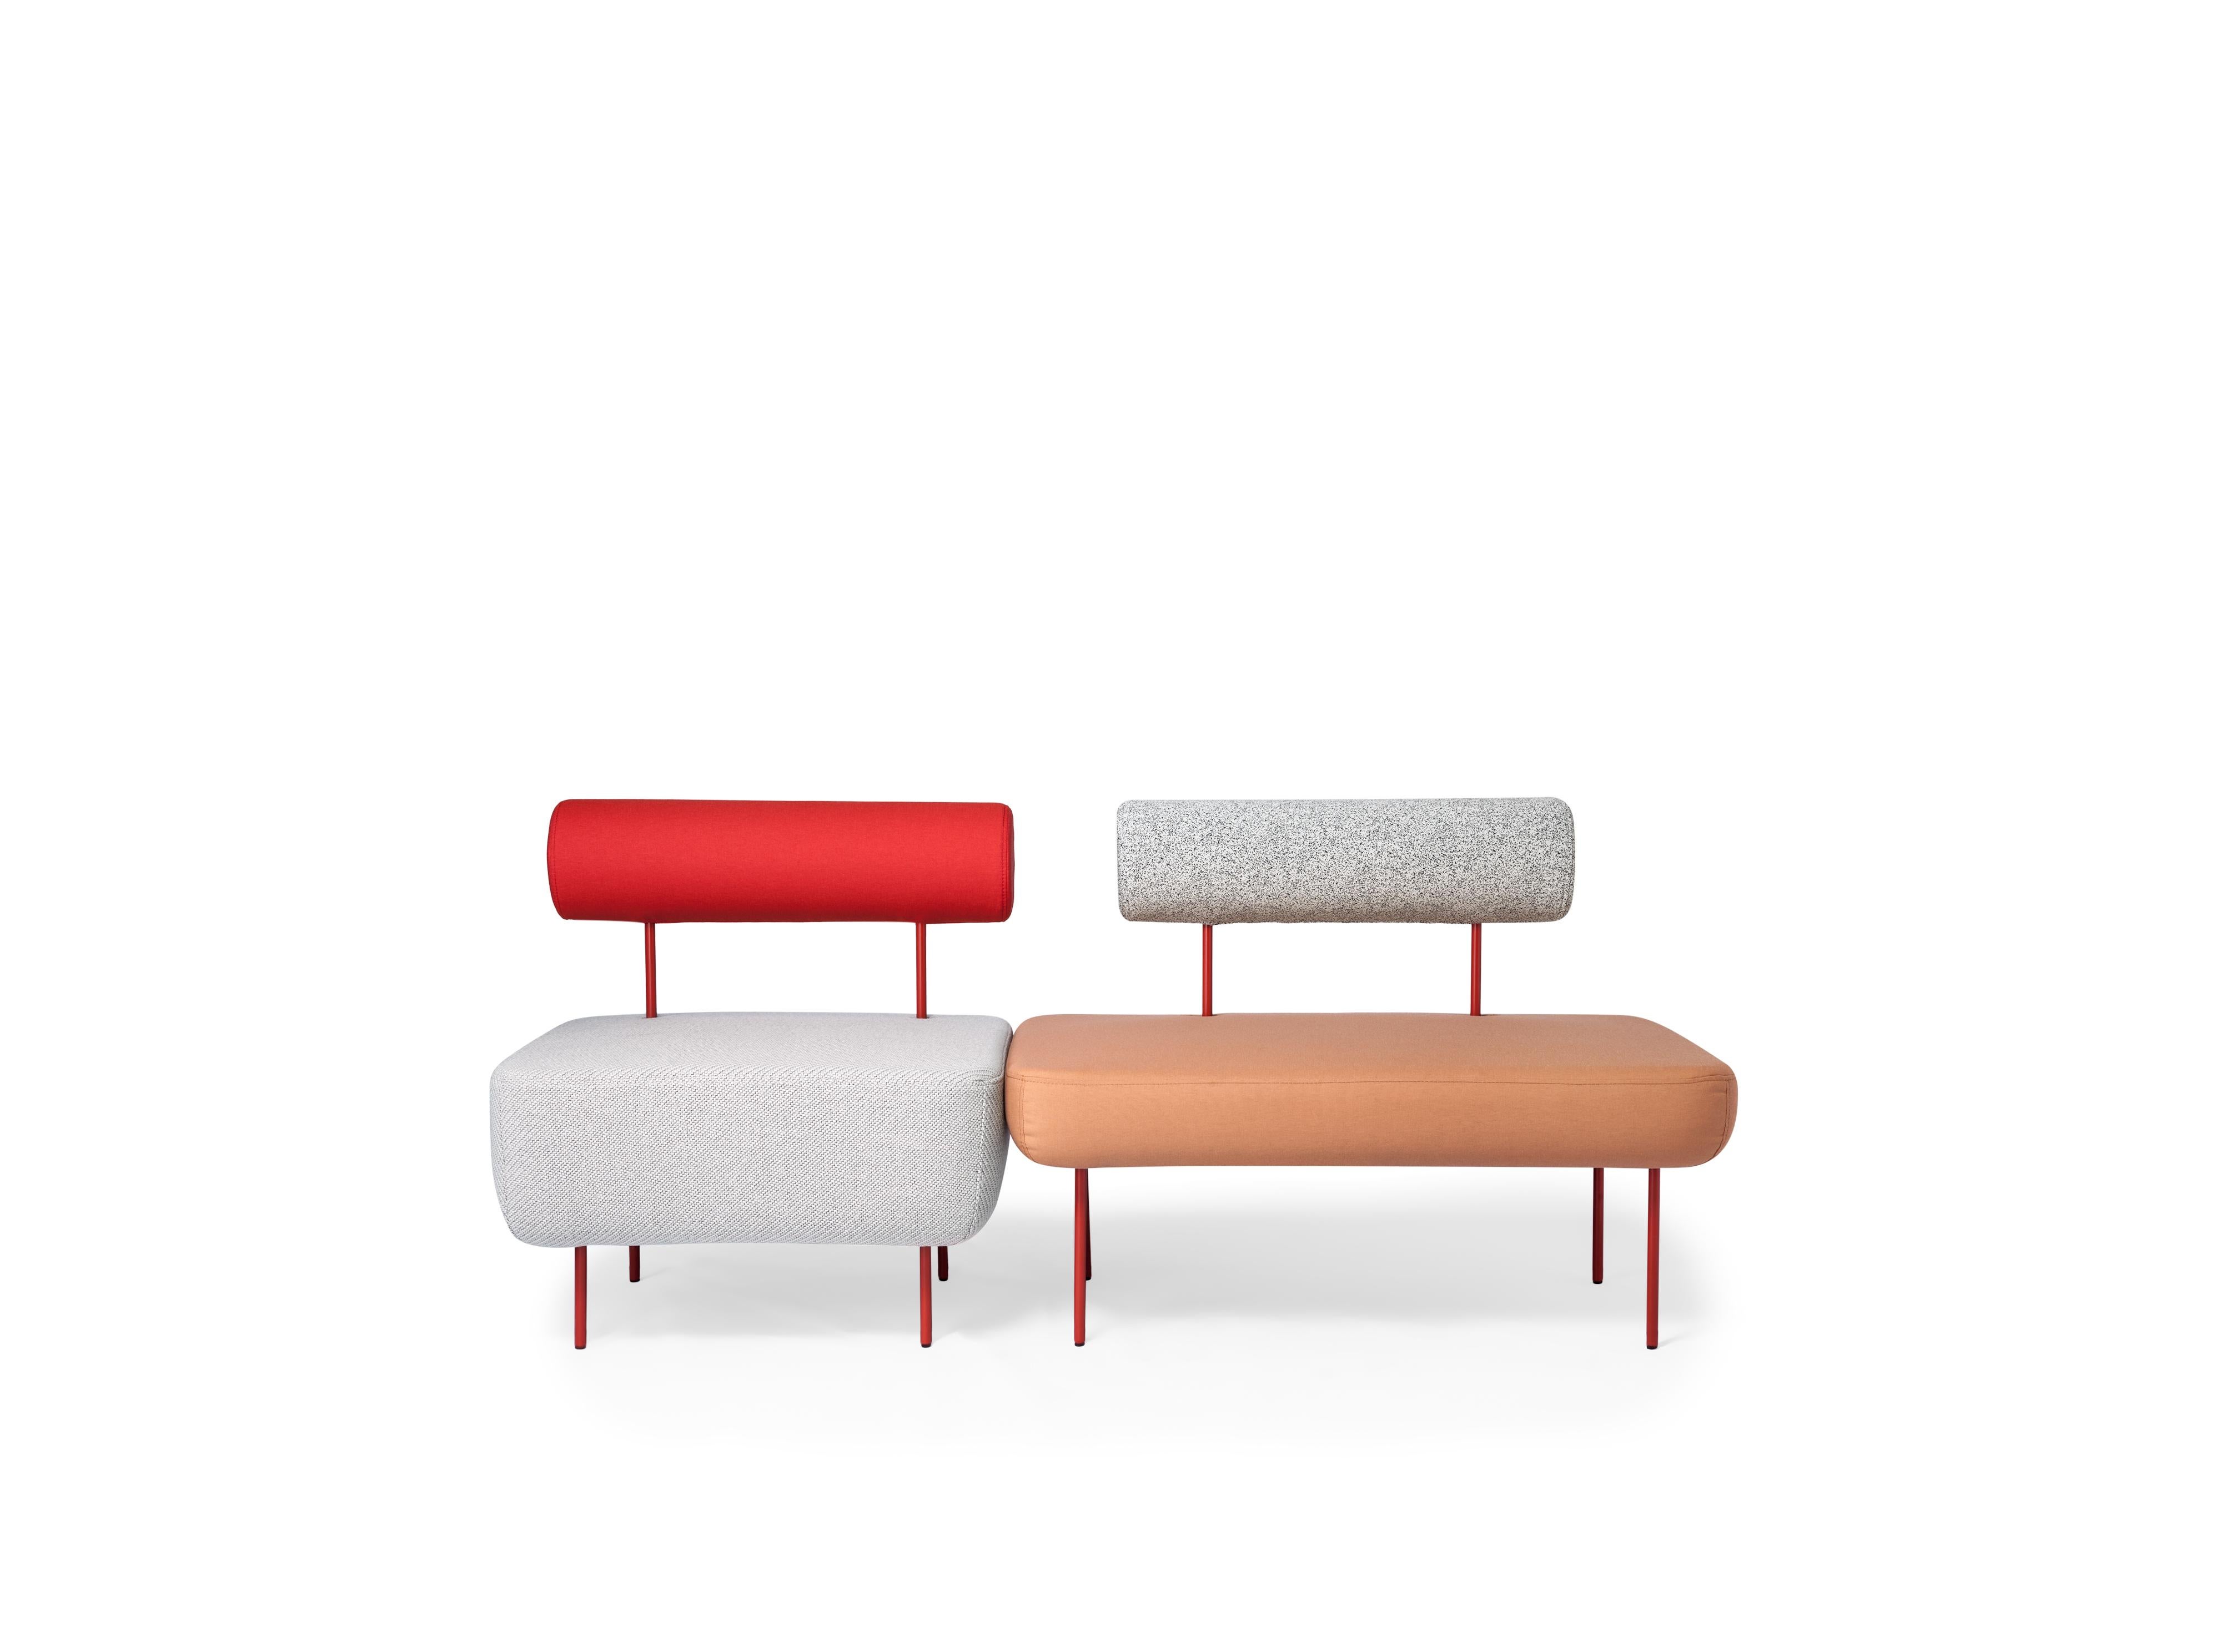 Contemporary Petite Friture Medium Hoff Armchair in White and Red by Morten & Jonas, 2015 For Sale